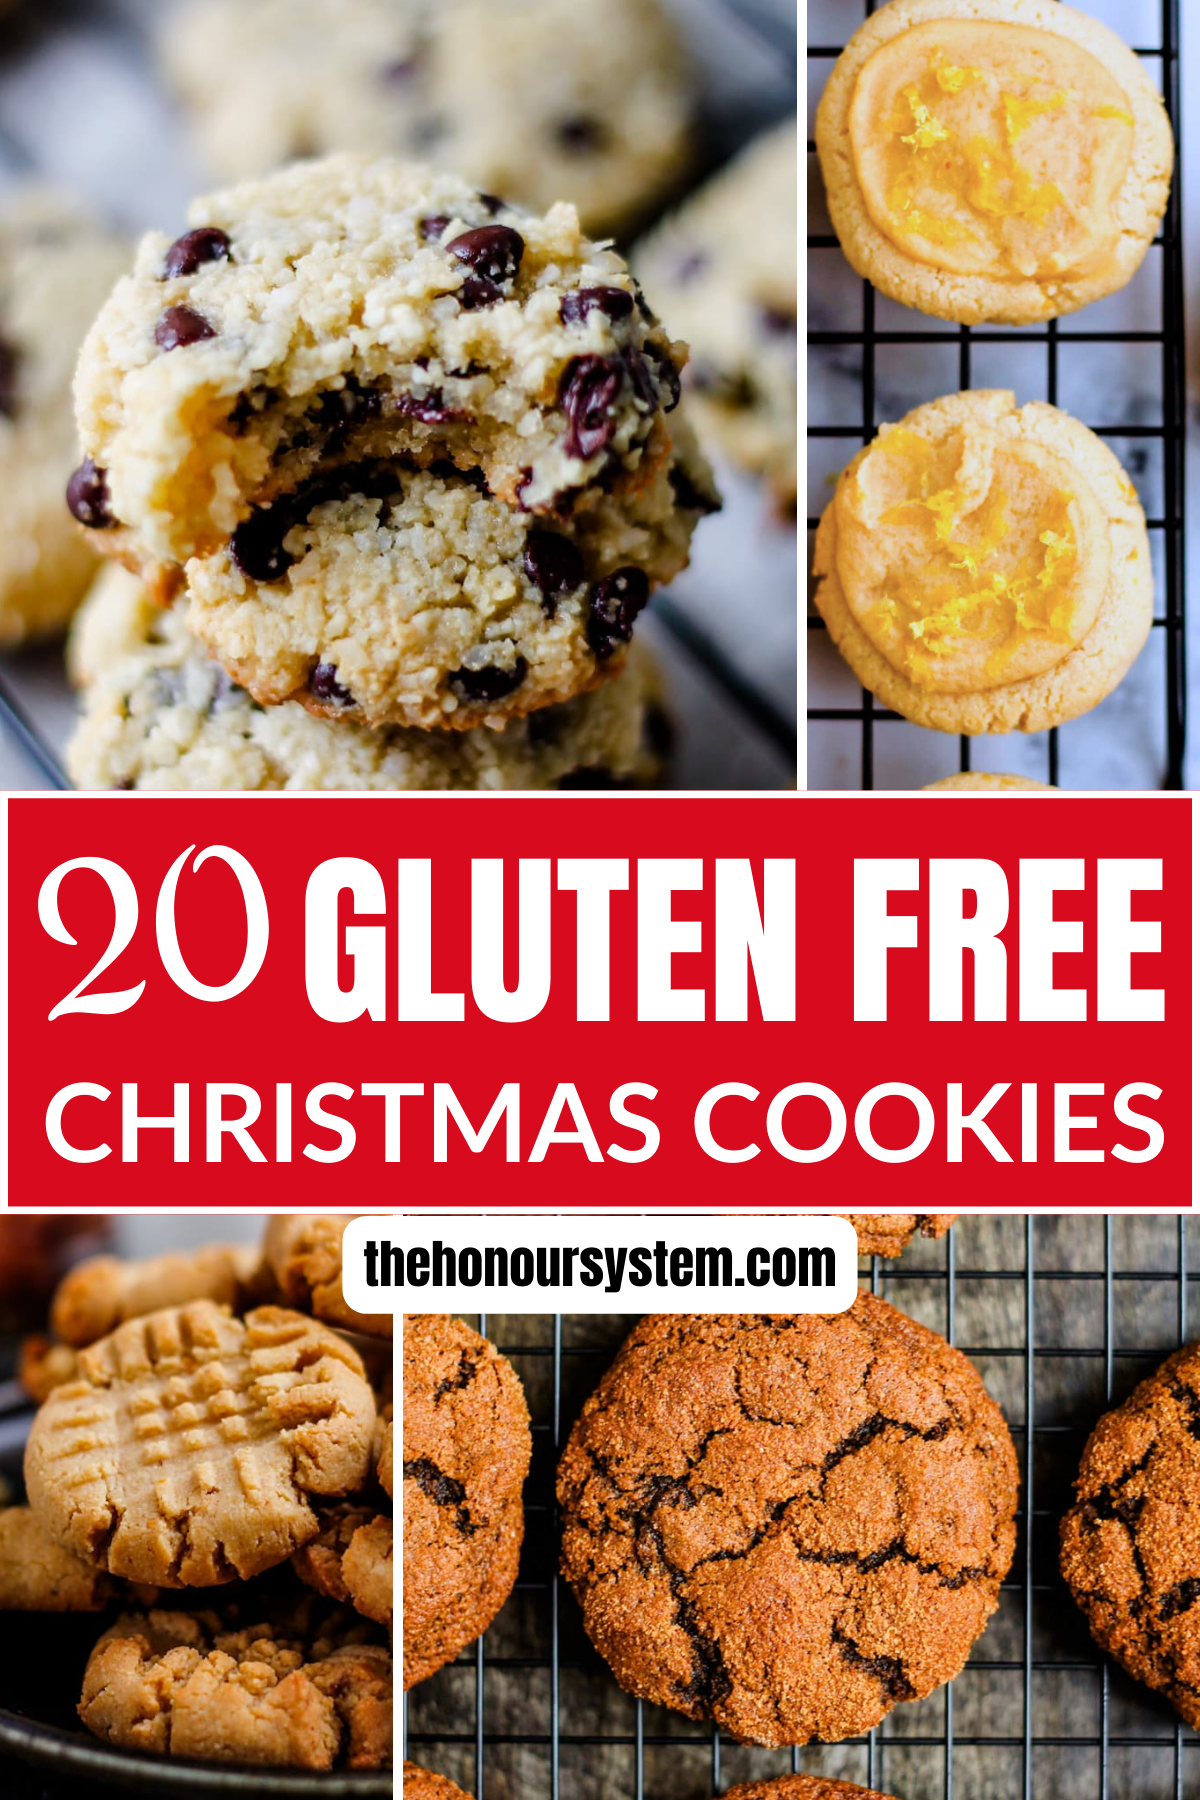 A collage of images of gluten free Christmas cookies.